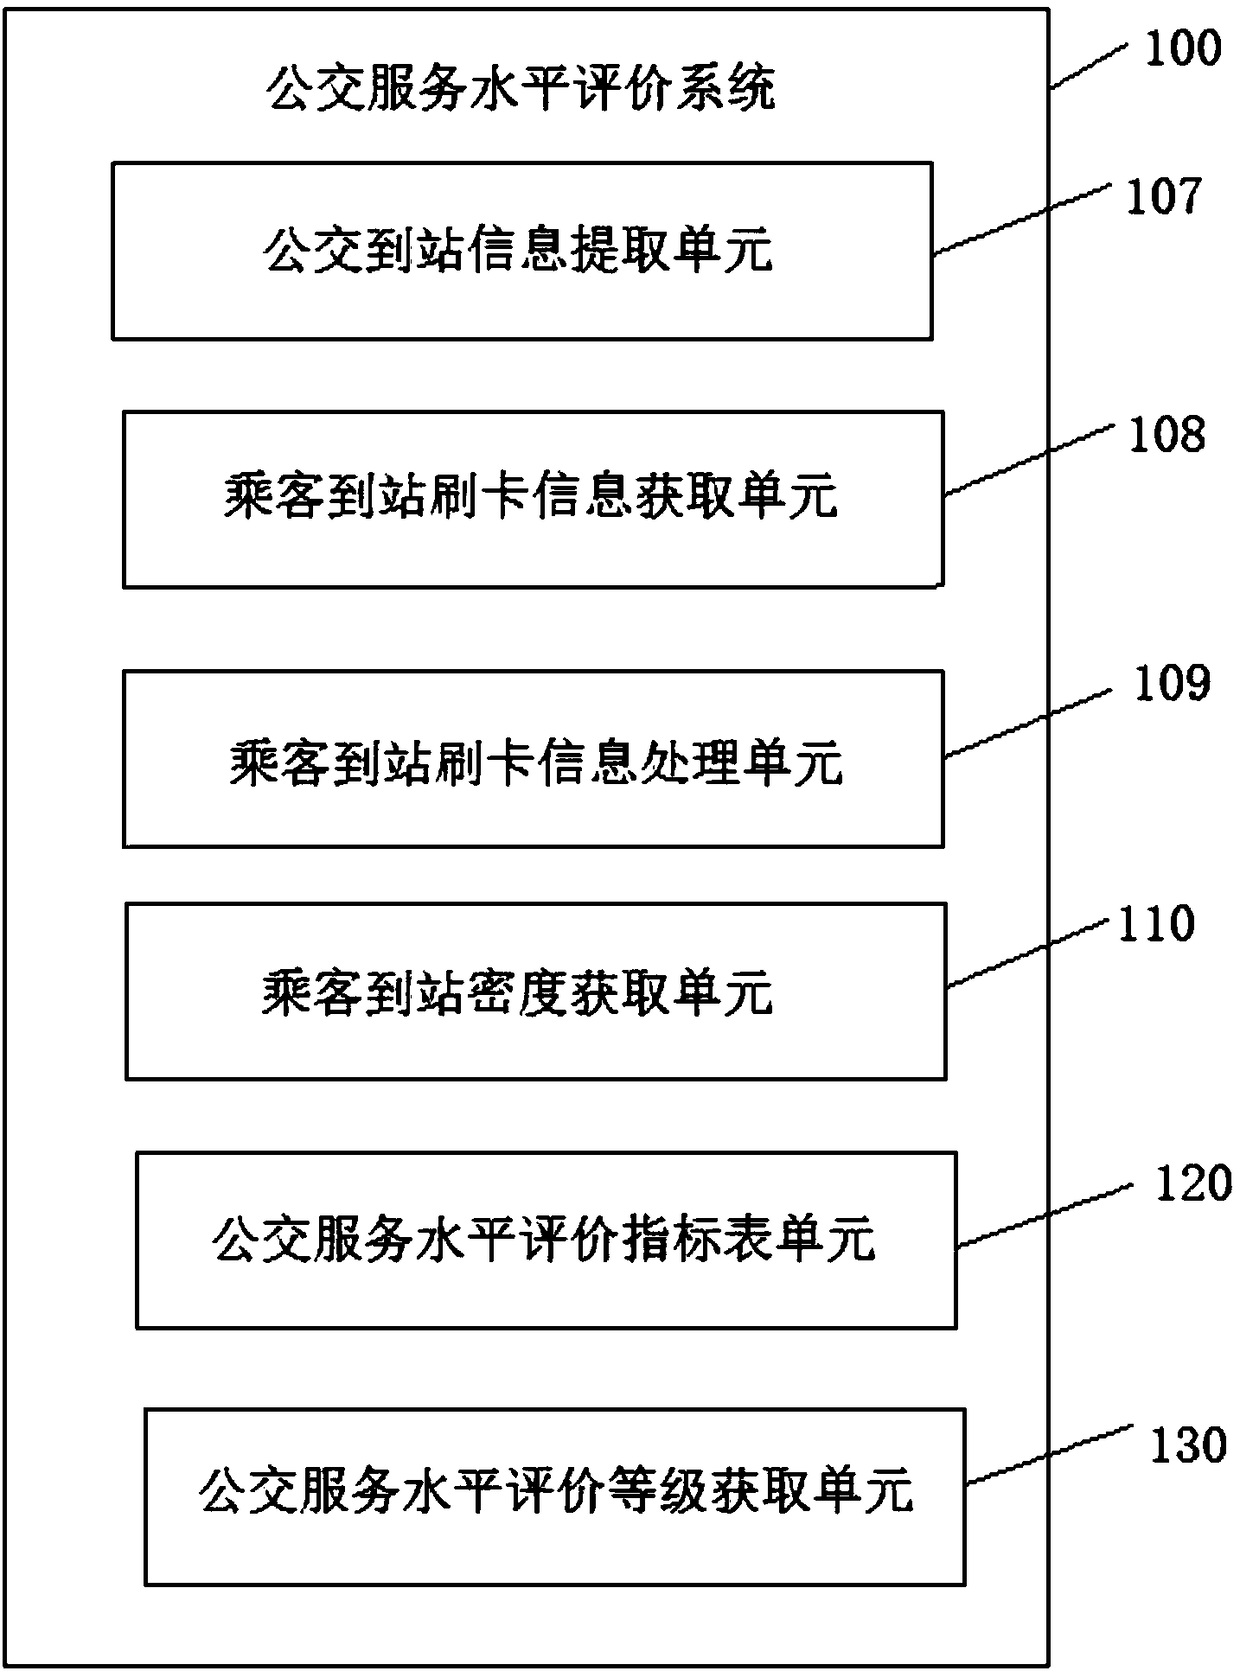 Bus service level evaluation system and method